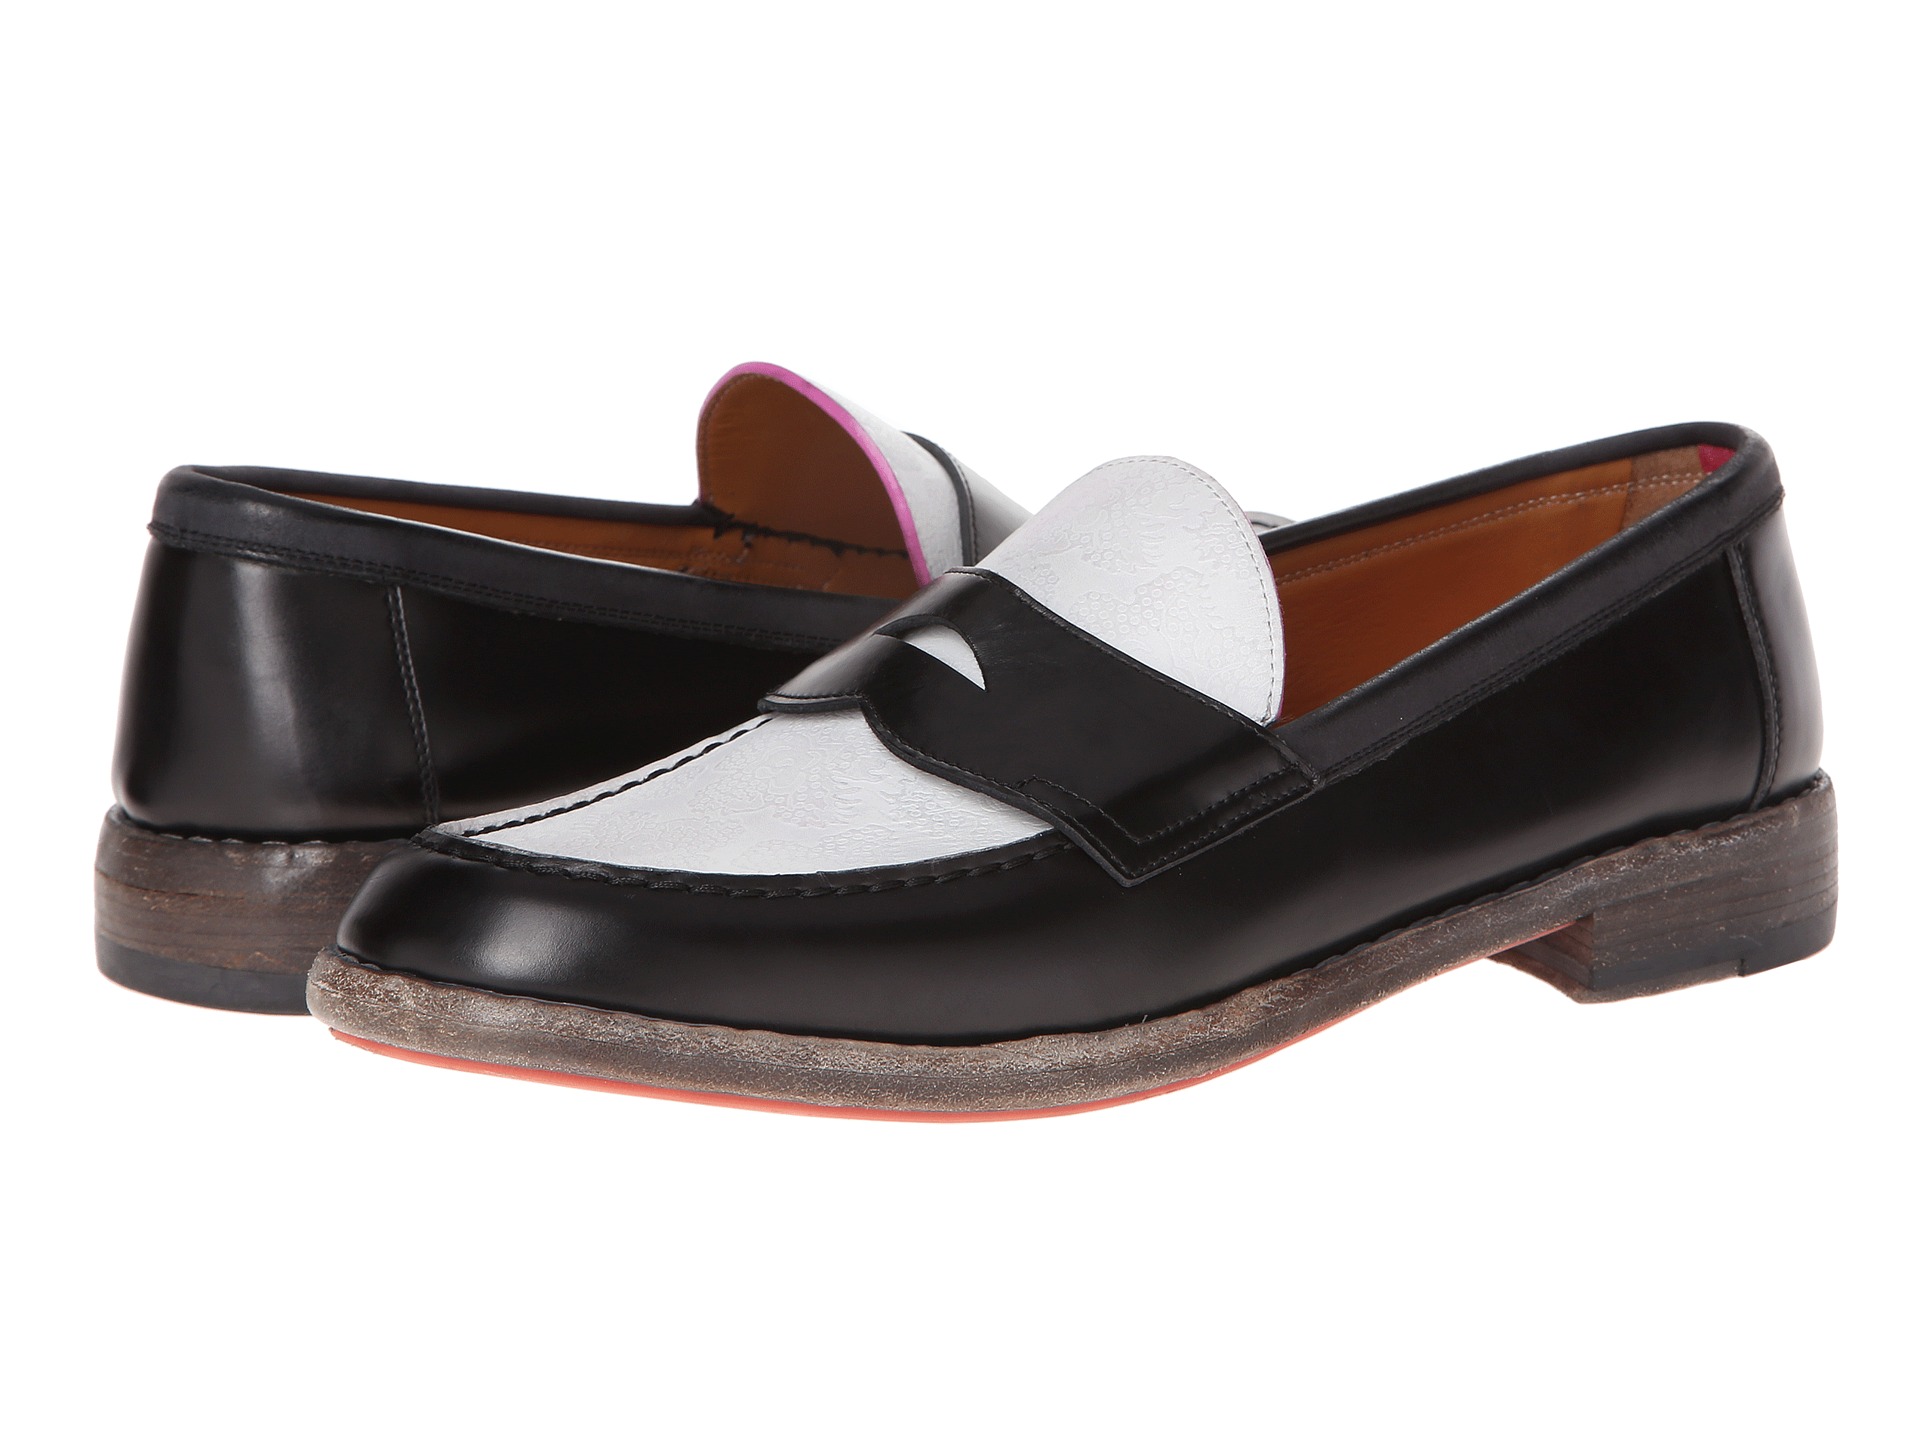 Marc Jacobs Penny Loafer Black White | Shipped Free at Zappos